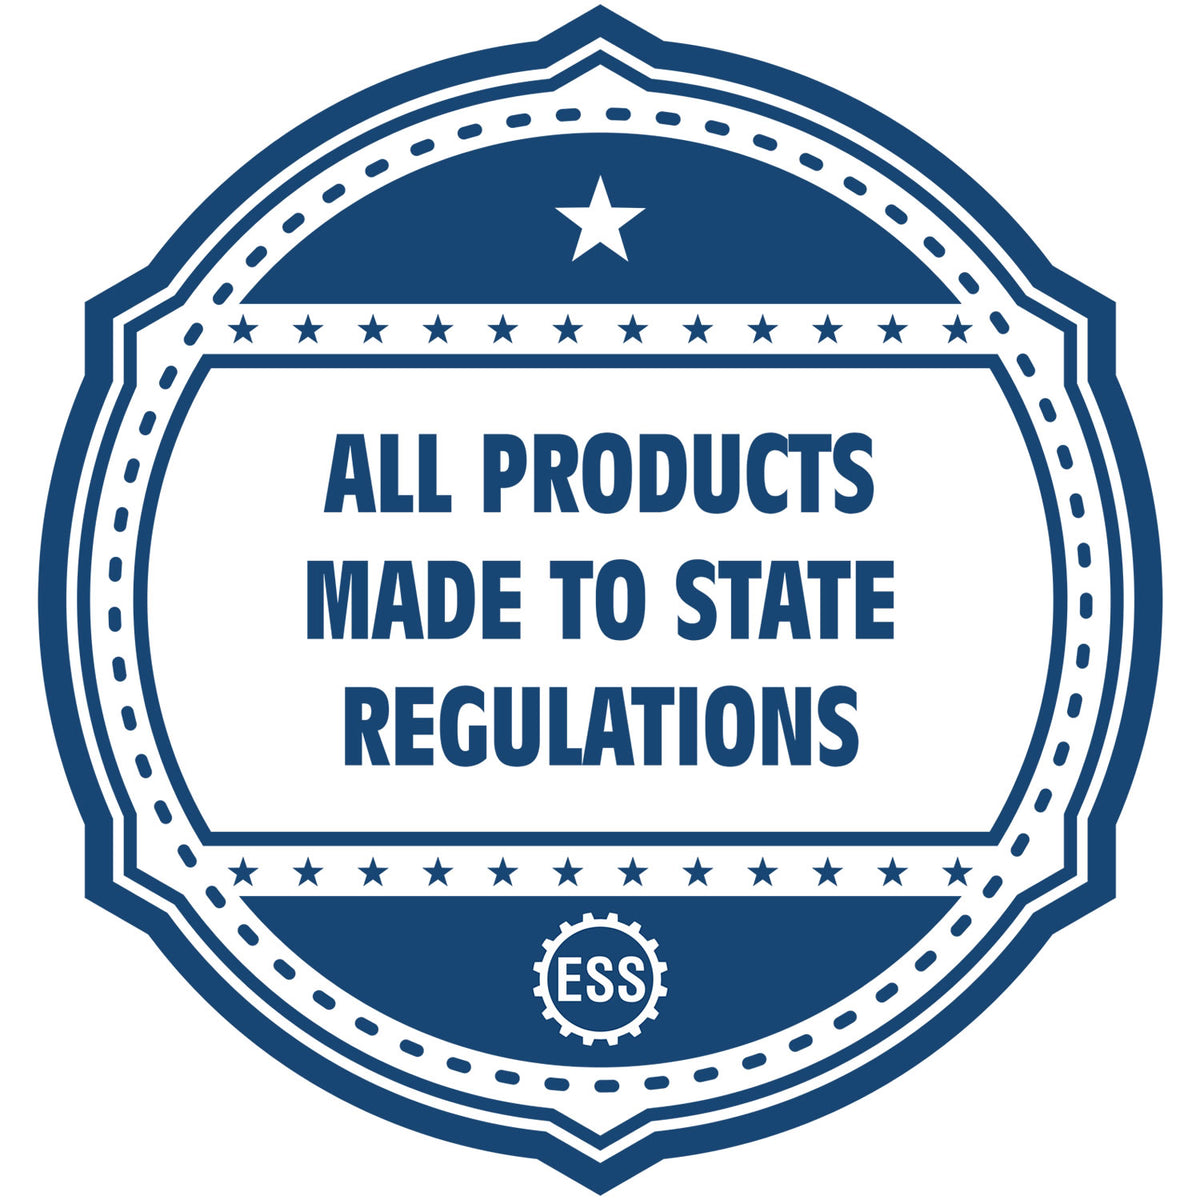 An icon or badge element for the Handheld Arizona Professional Engineer Embosser showing that this product is made in compliance with state regulations.